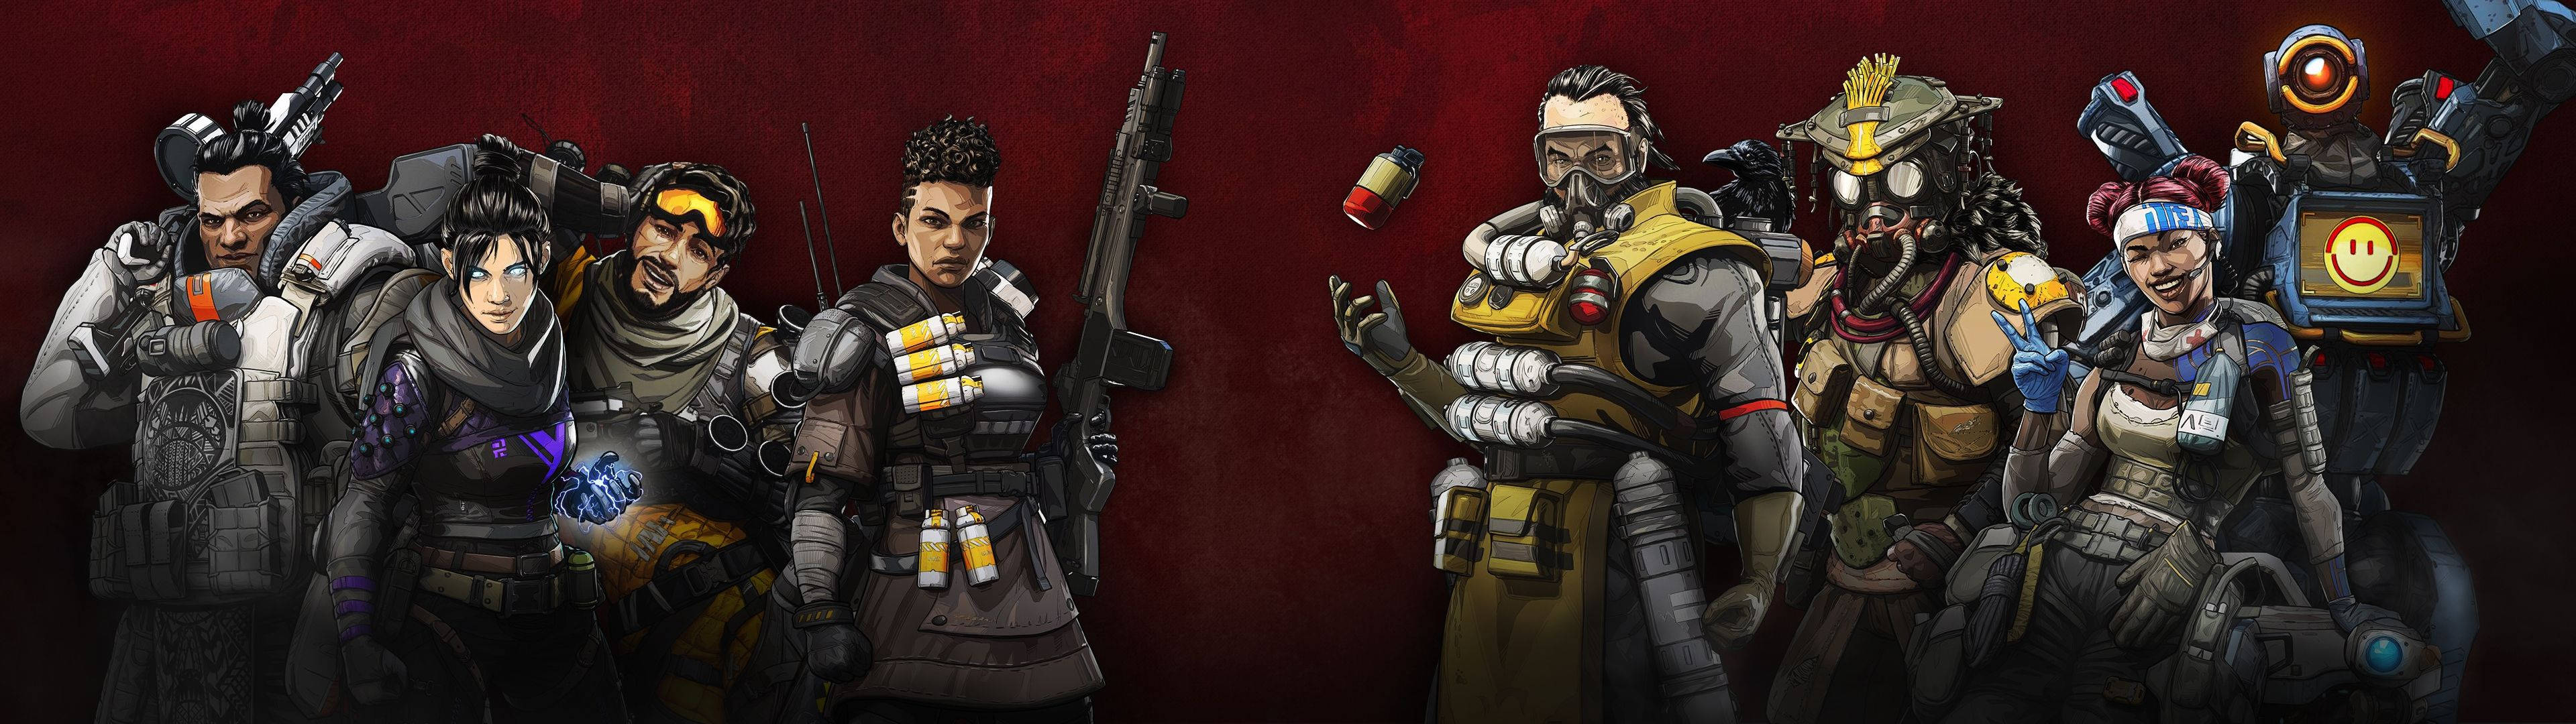 Apex Legends 3840X1080 Wallpaper and Background Image